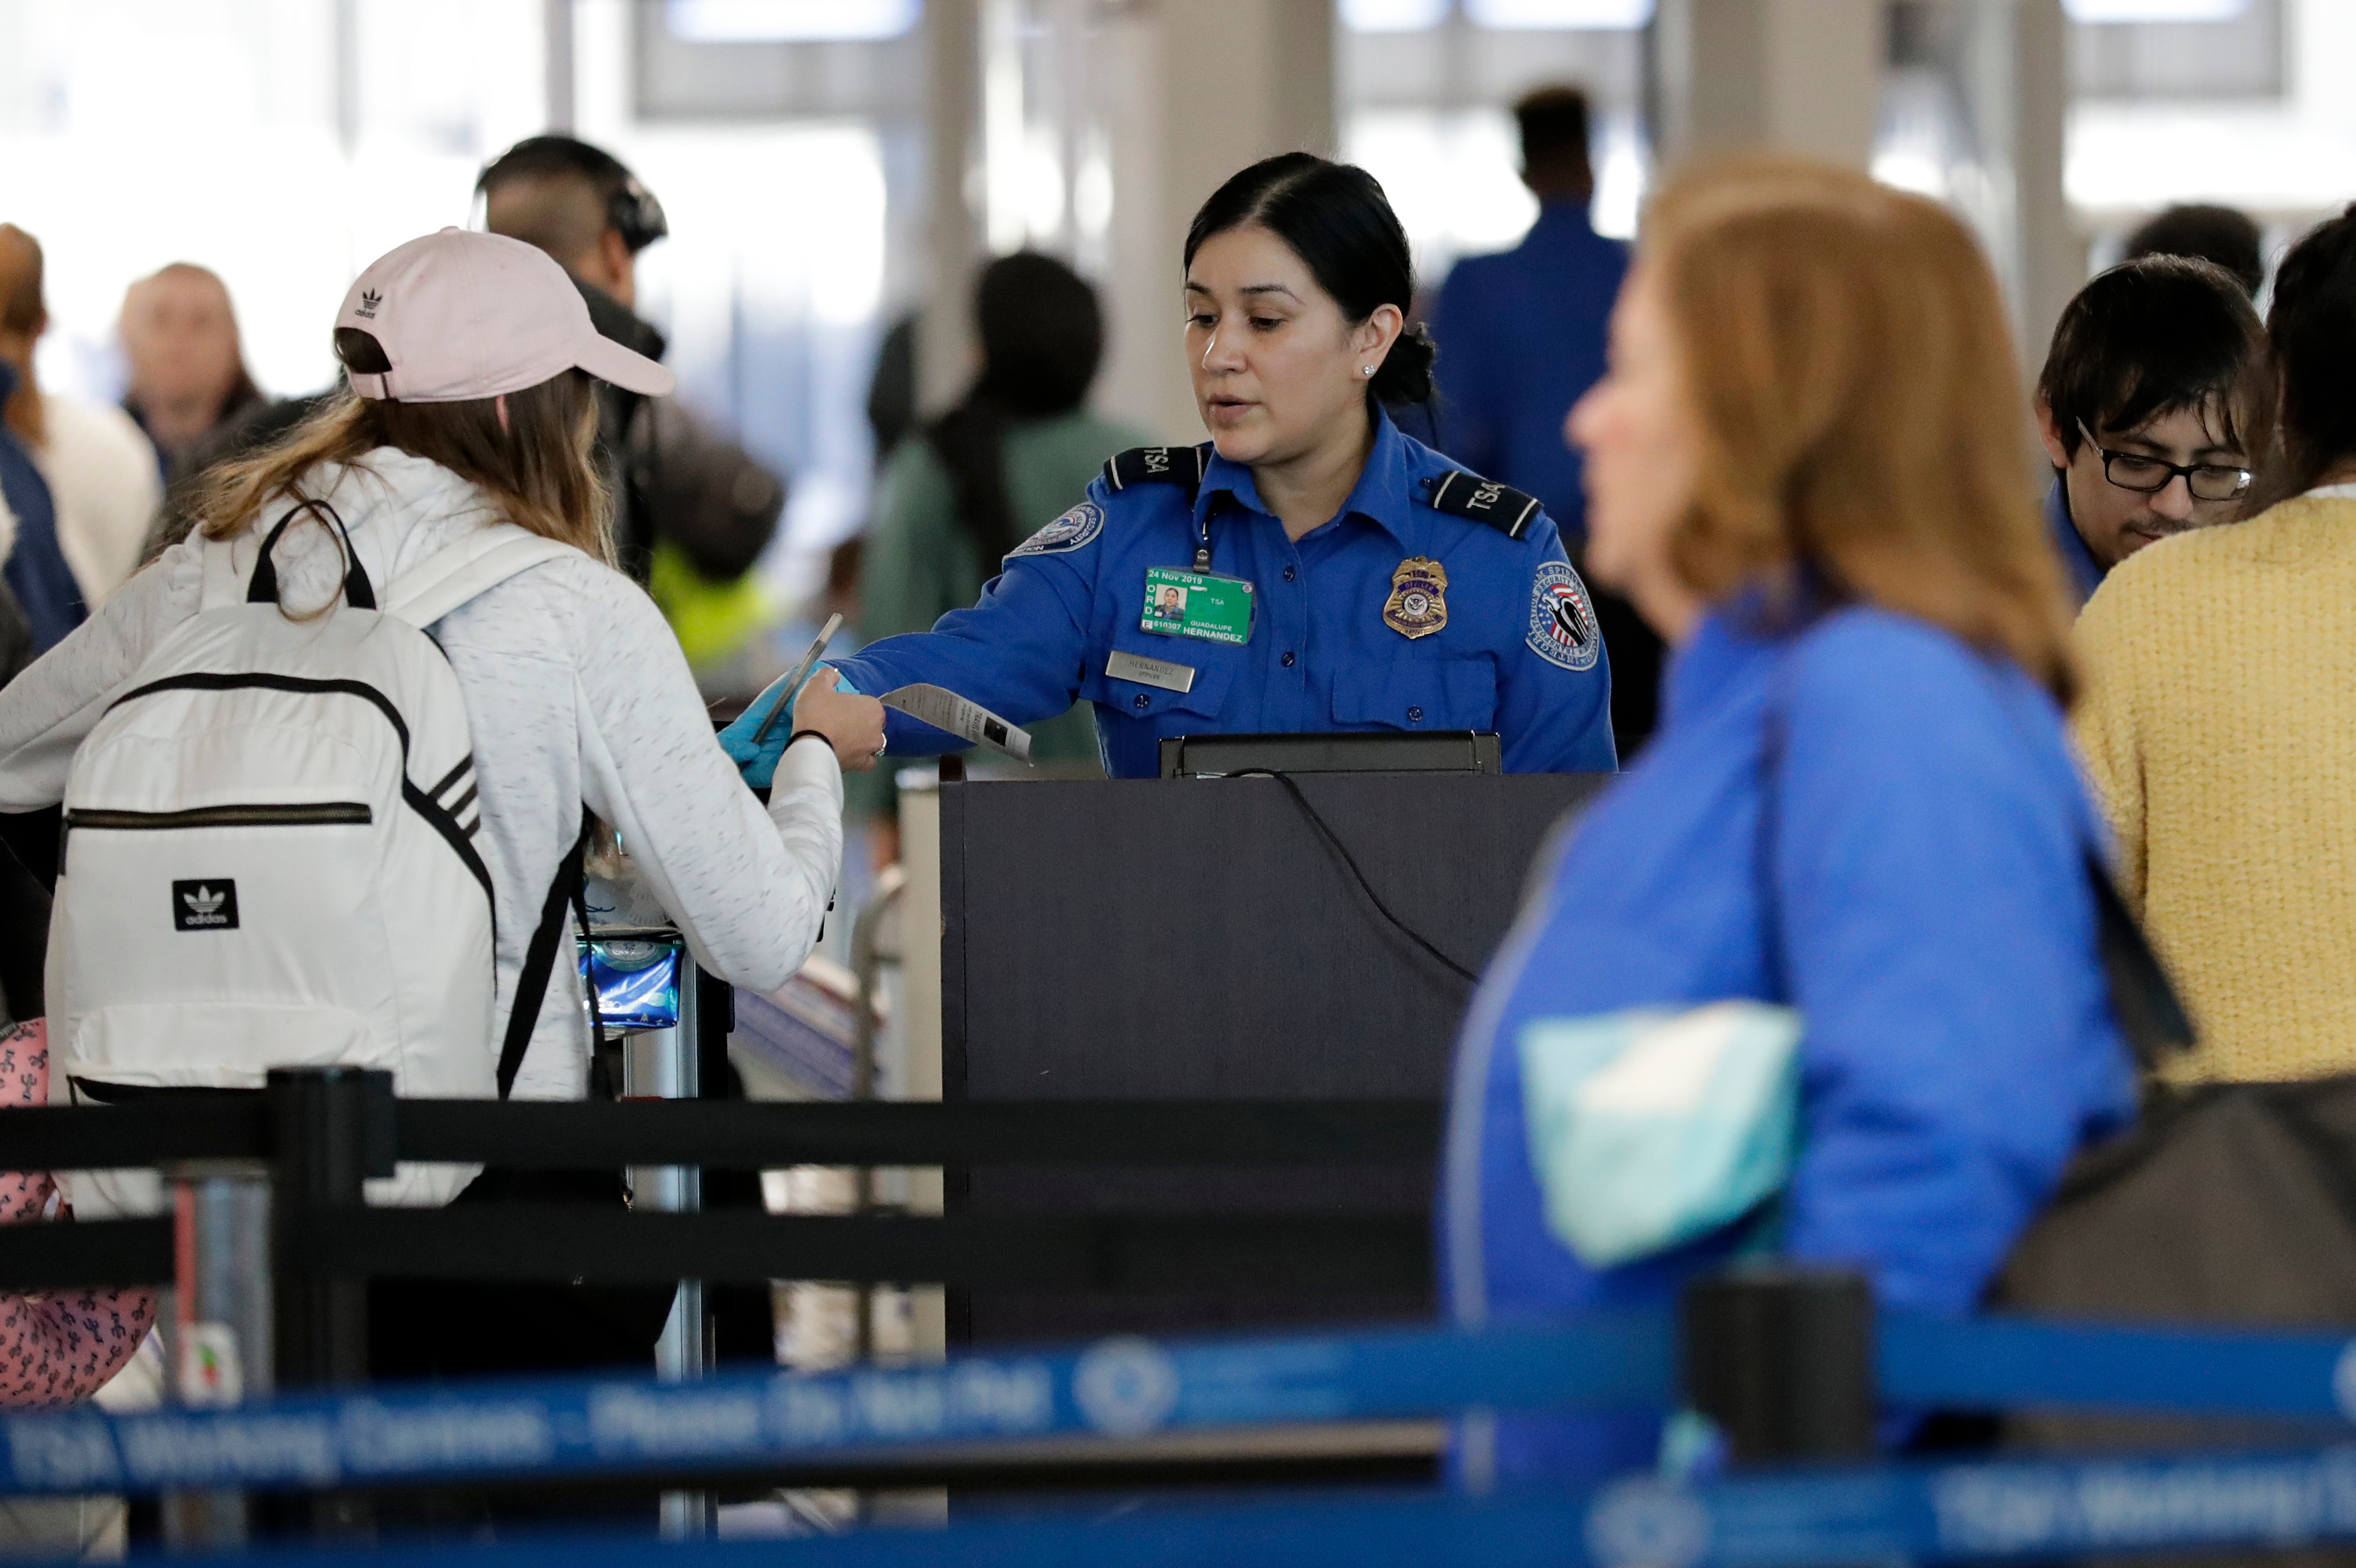 TSA Employees Forced to Work Without Pay During the Shutdown Are Delaying Car Payments and Struggling to Make Ends Meet